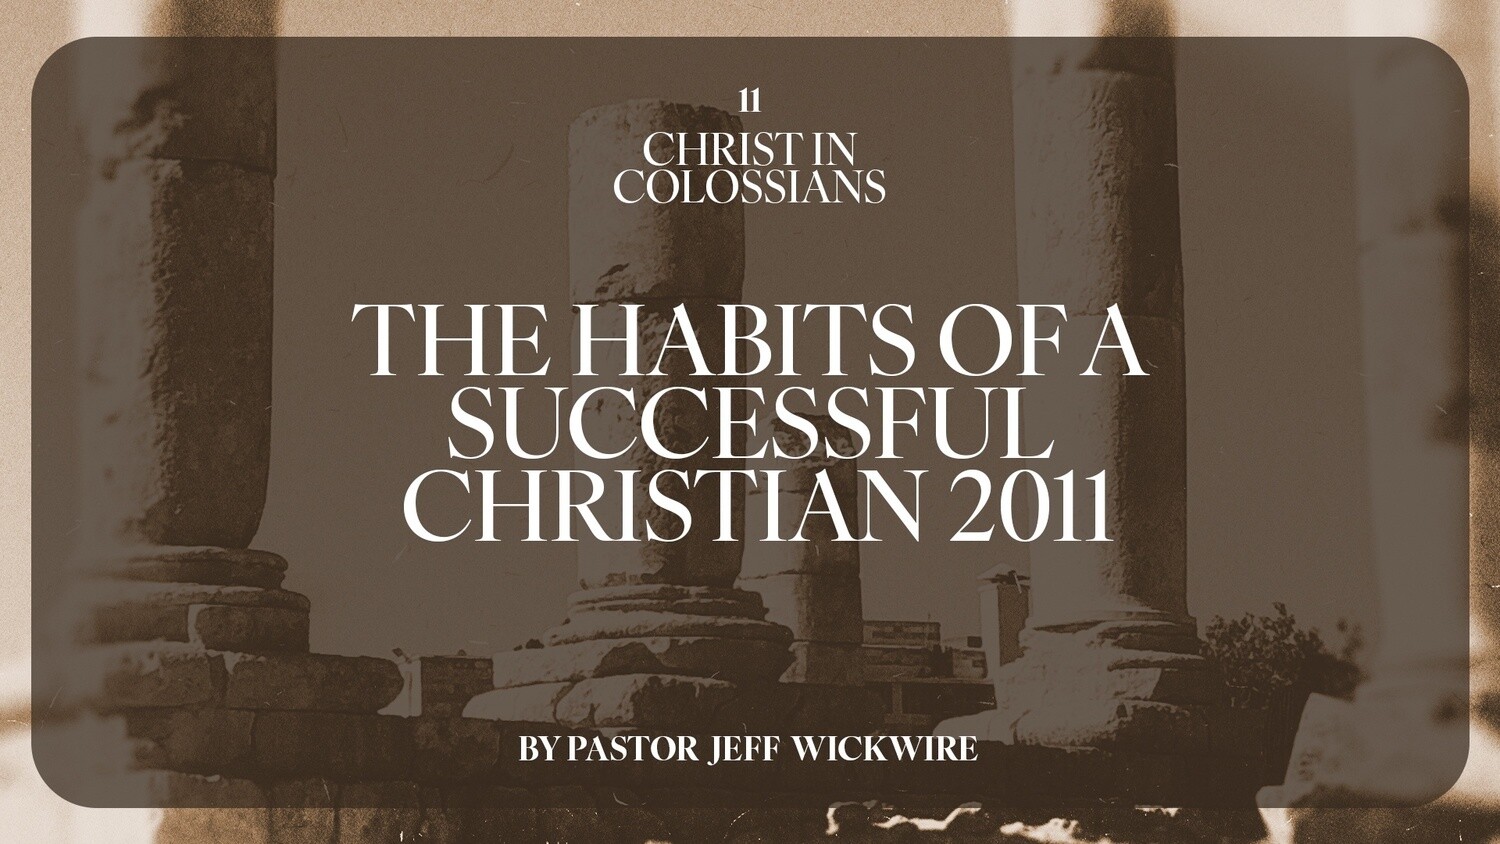 11 - The Habits Of A Successful Christians 2011 By Pastor Jeff Wickwire